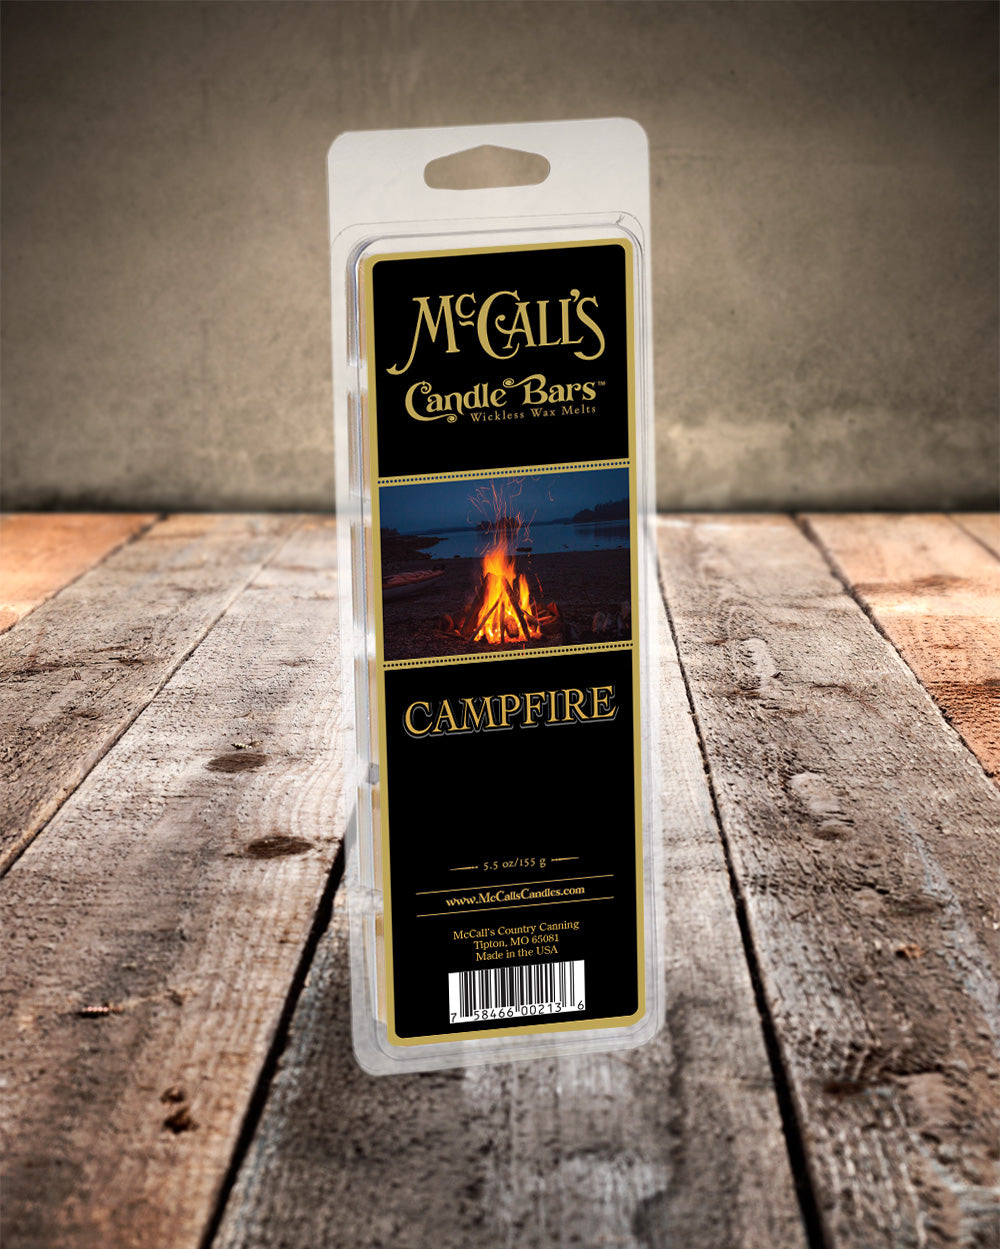 CAMPFIRE Candle Bars-5.5 oz Pack